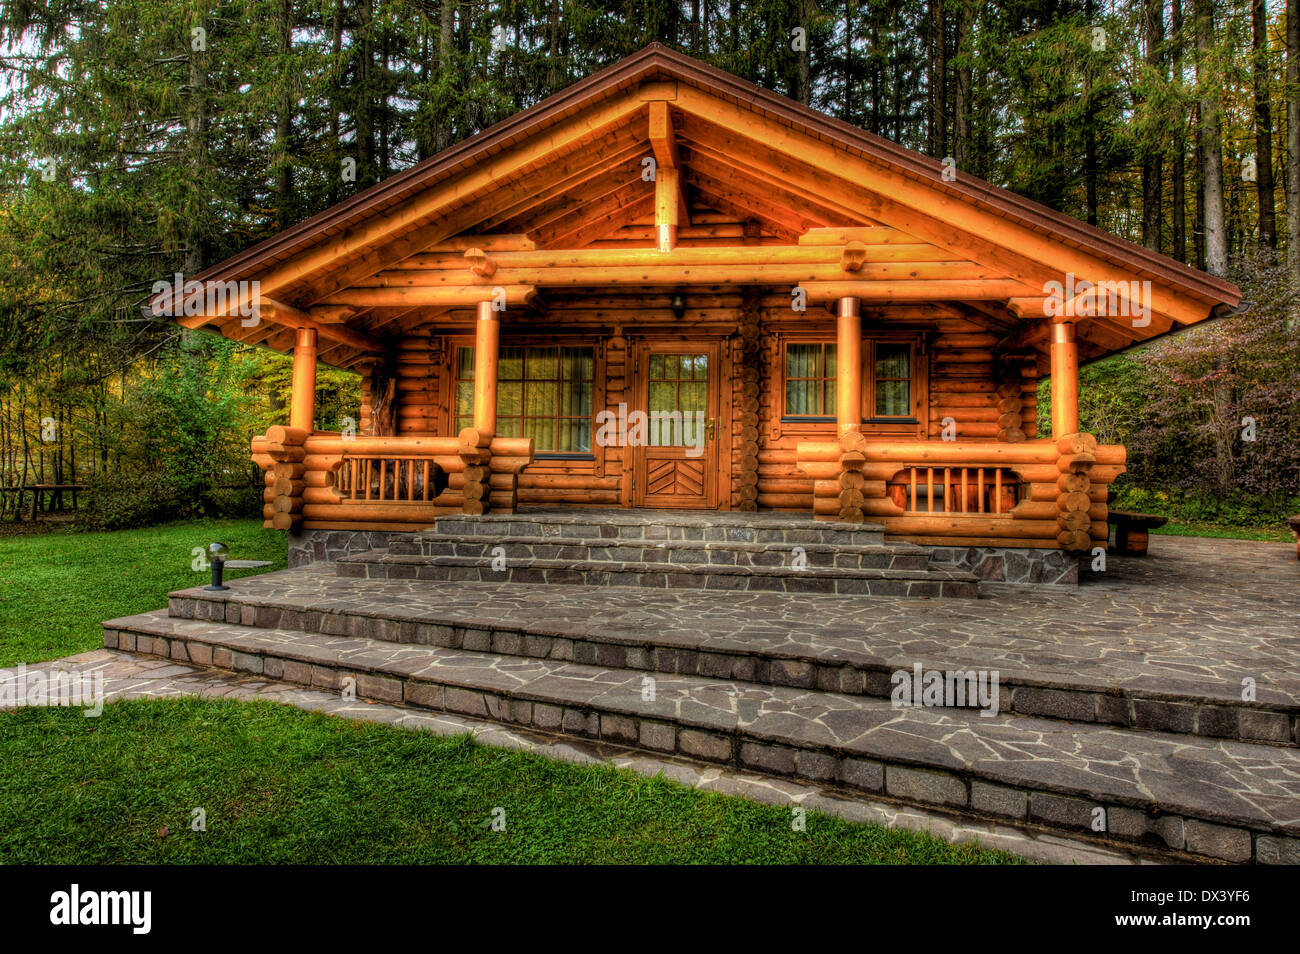 Holiday apartment - wooden cottage in forest Stock Photo - Alamy